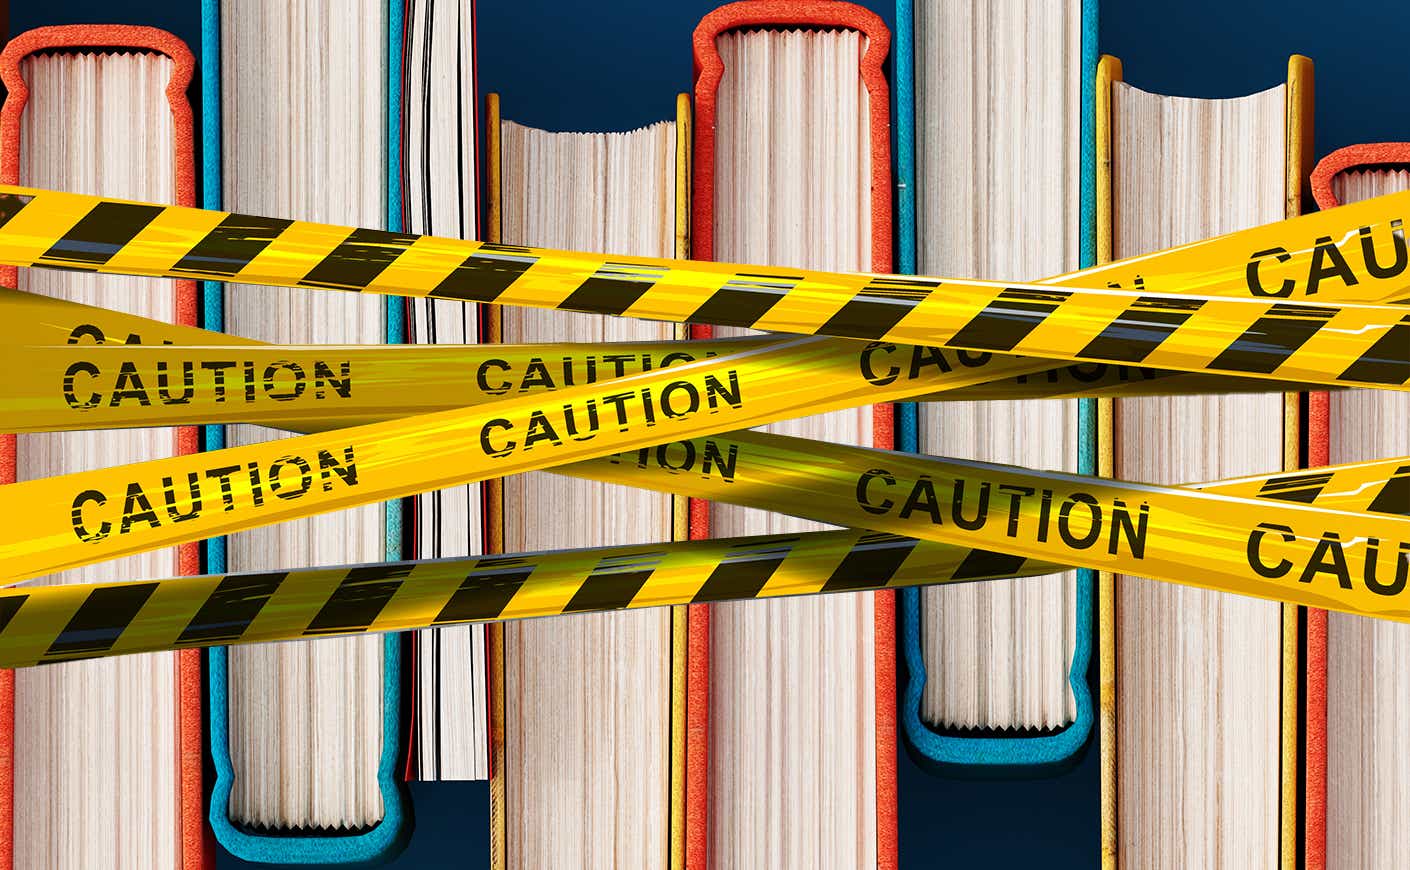 a row of books with caution tape on them